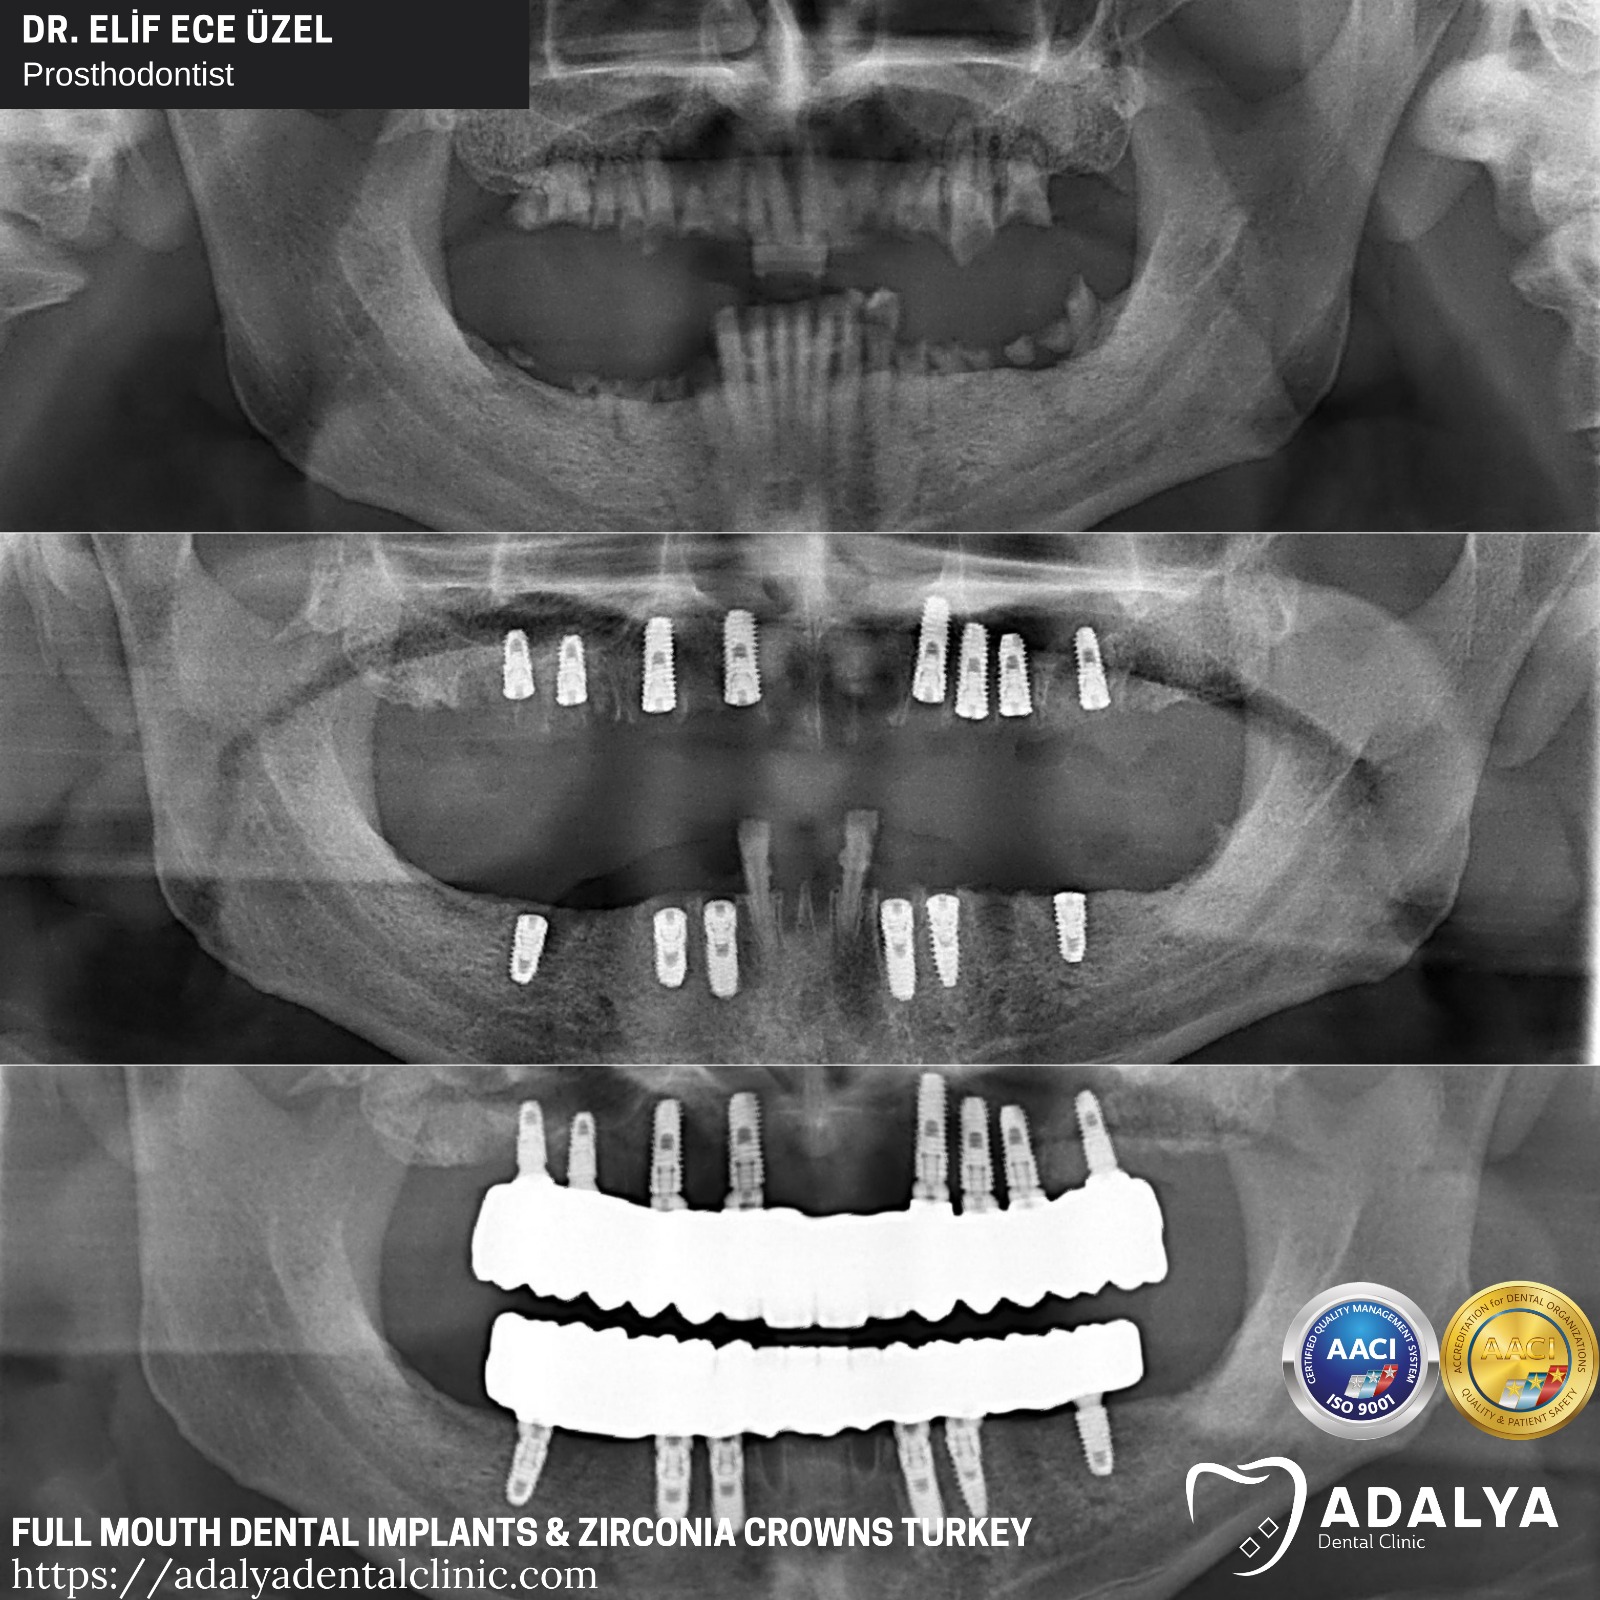 full mouth dental implants turkey price package deals cost